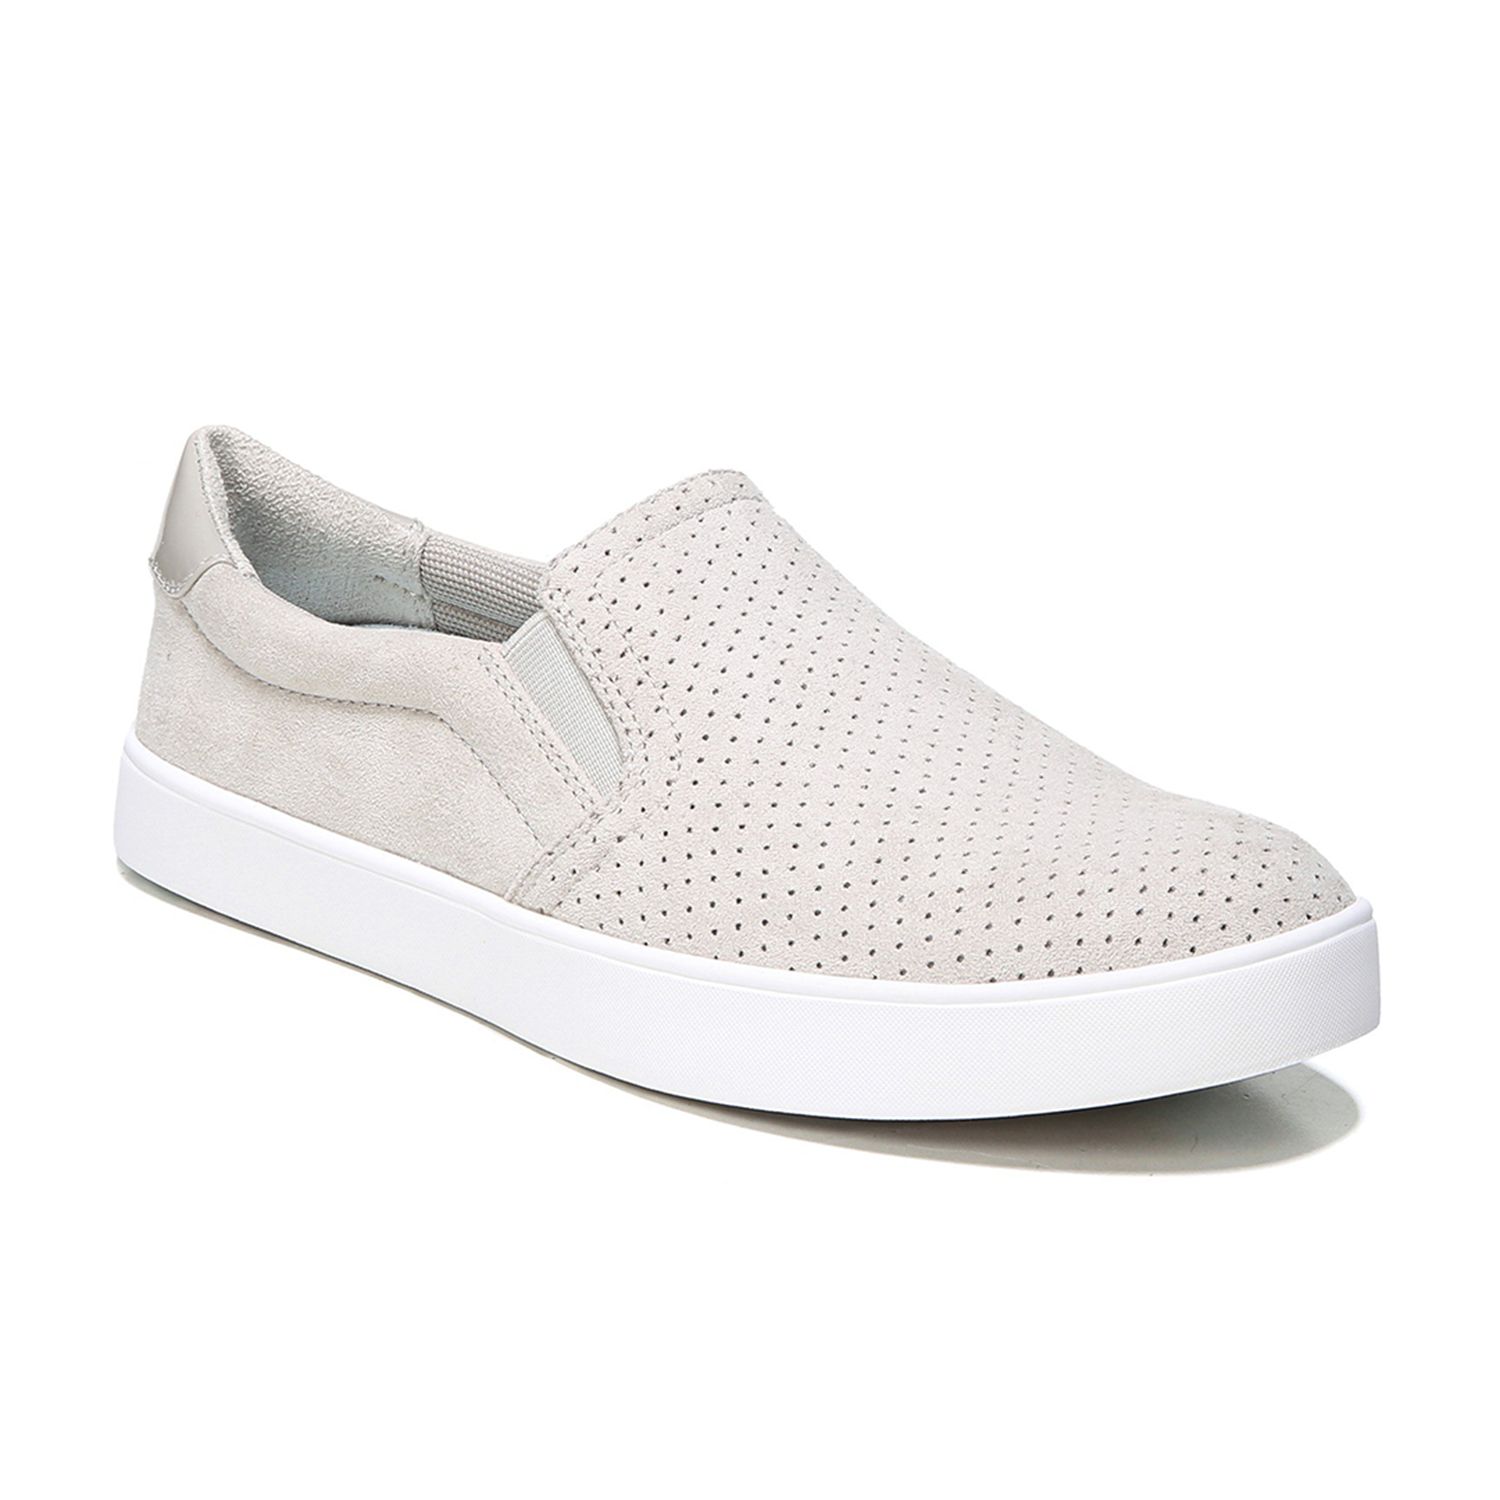 Image for Dr. Scholl's Madison Women's Slip-On Sneakers at Kohl's.